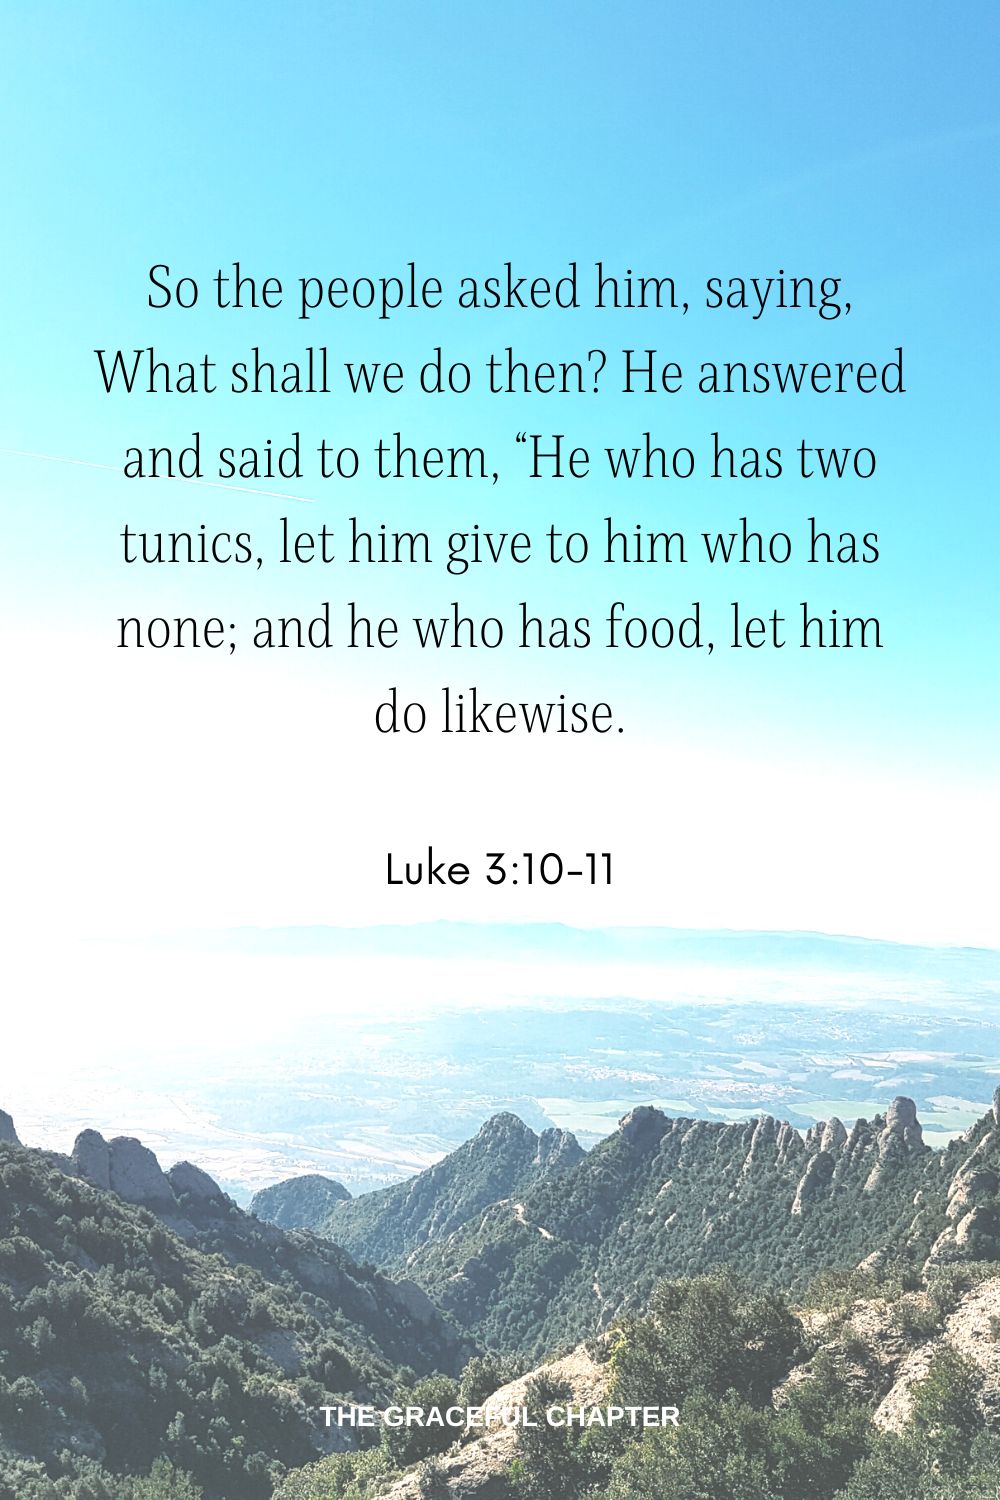 So the people asked him, saying, “What shall we do then? He answered and said to them, “He who has two tunics, let him give to him who has none; and he who has food, let him do likewise. Luke 3:10-11